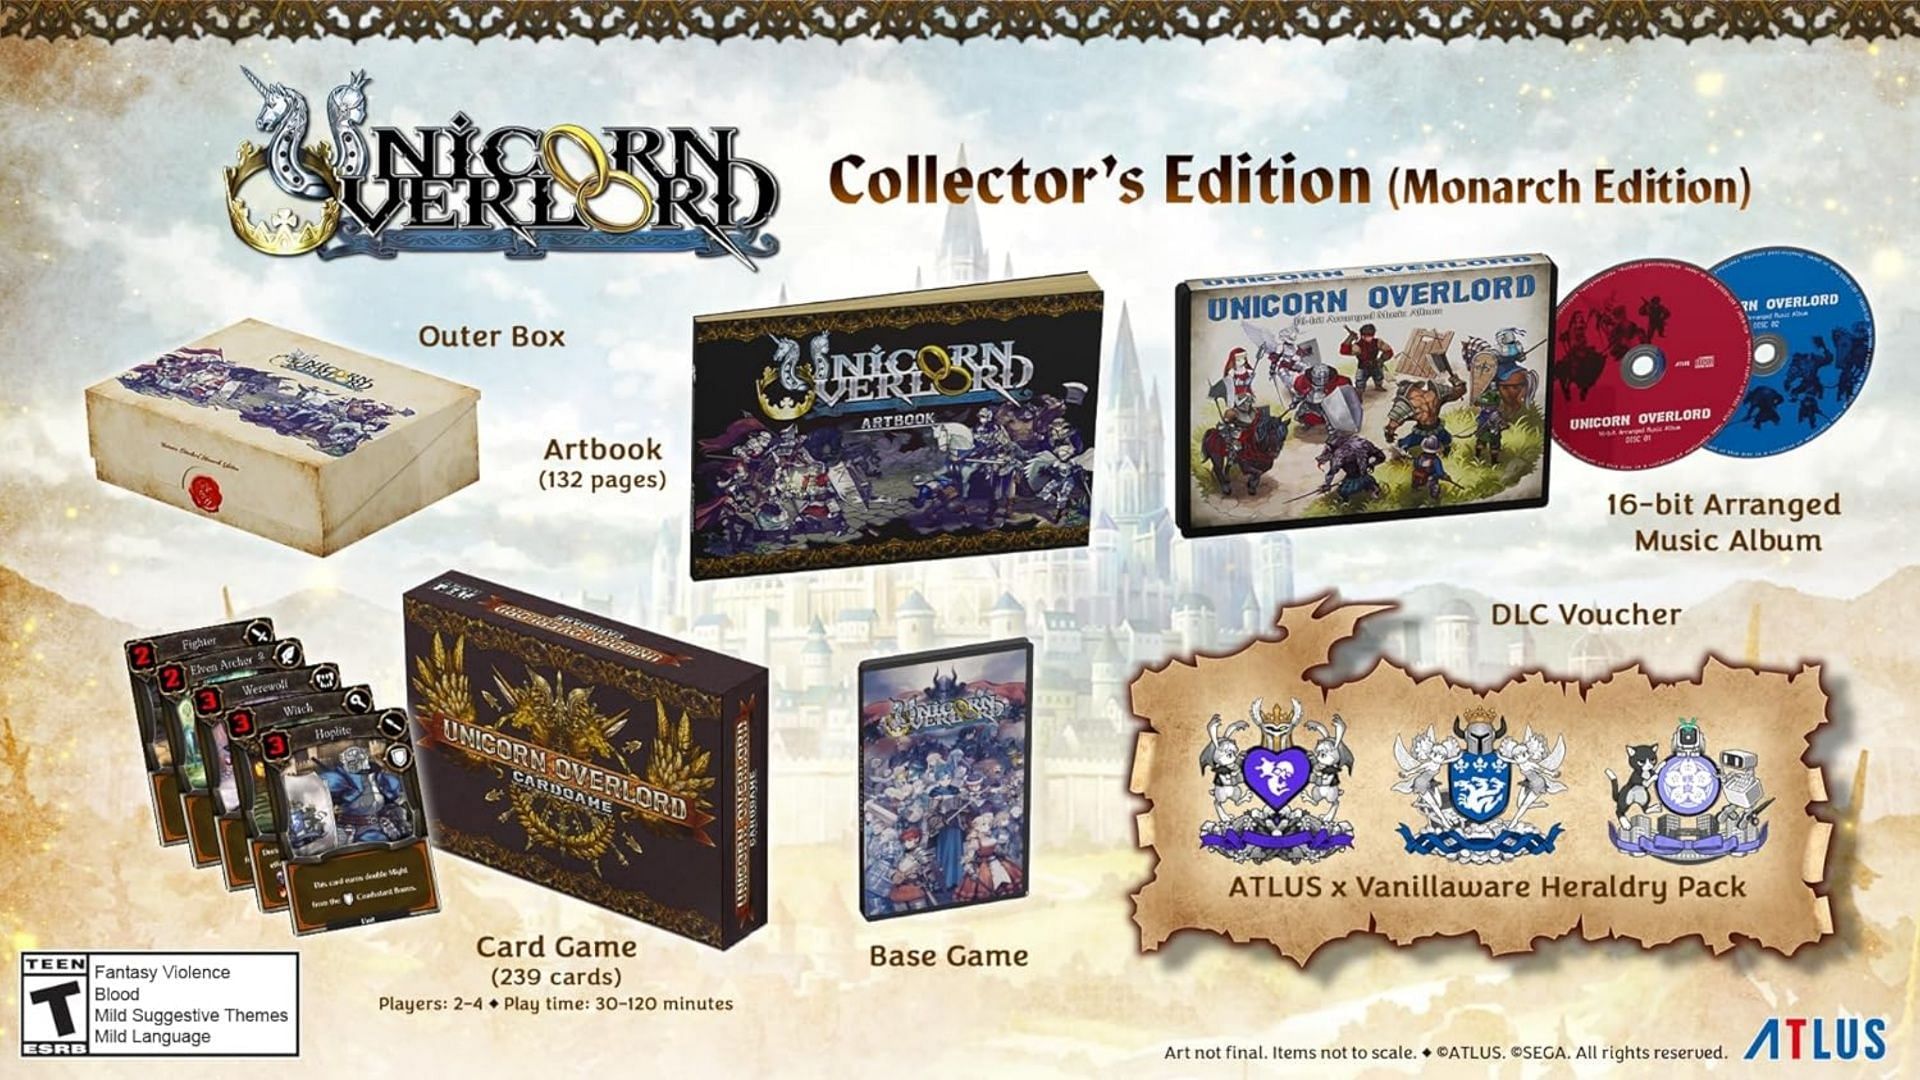 Monarch Edition physical content (Image via Atlus)